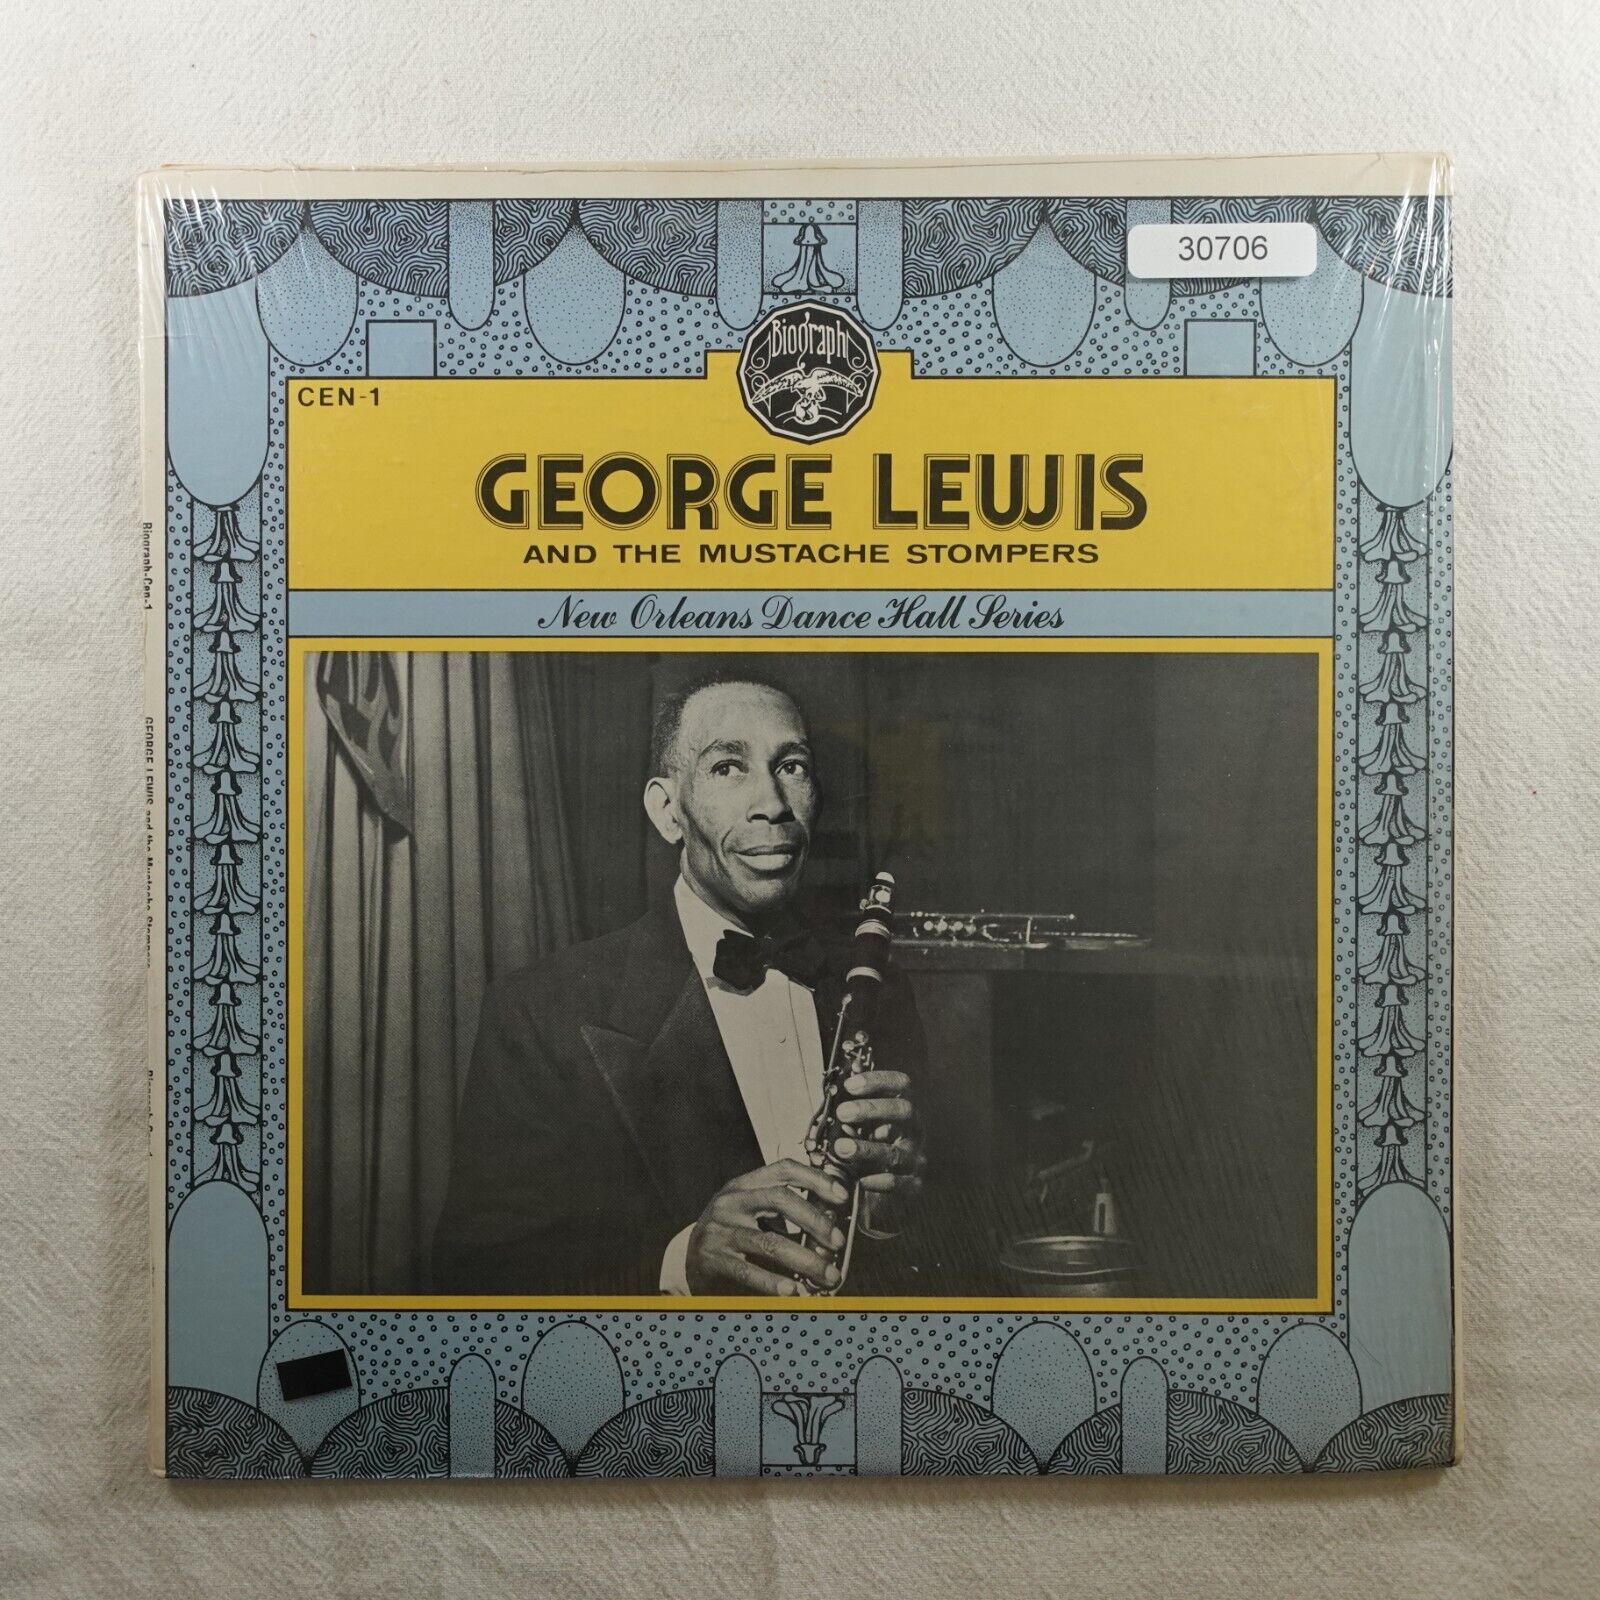 George Lewis With The Mustache Stompers LP Vinyl Record Album